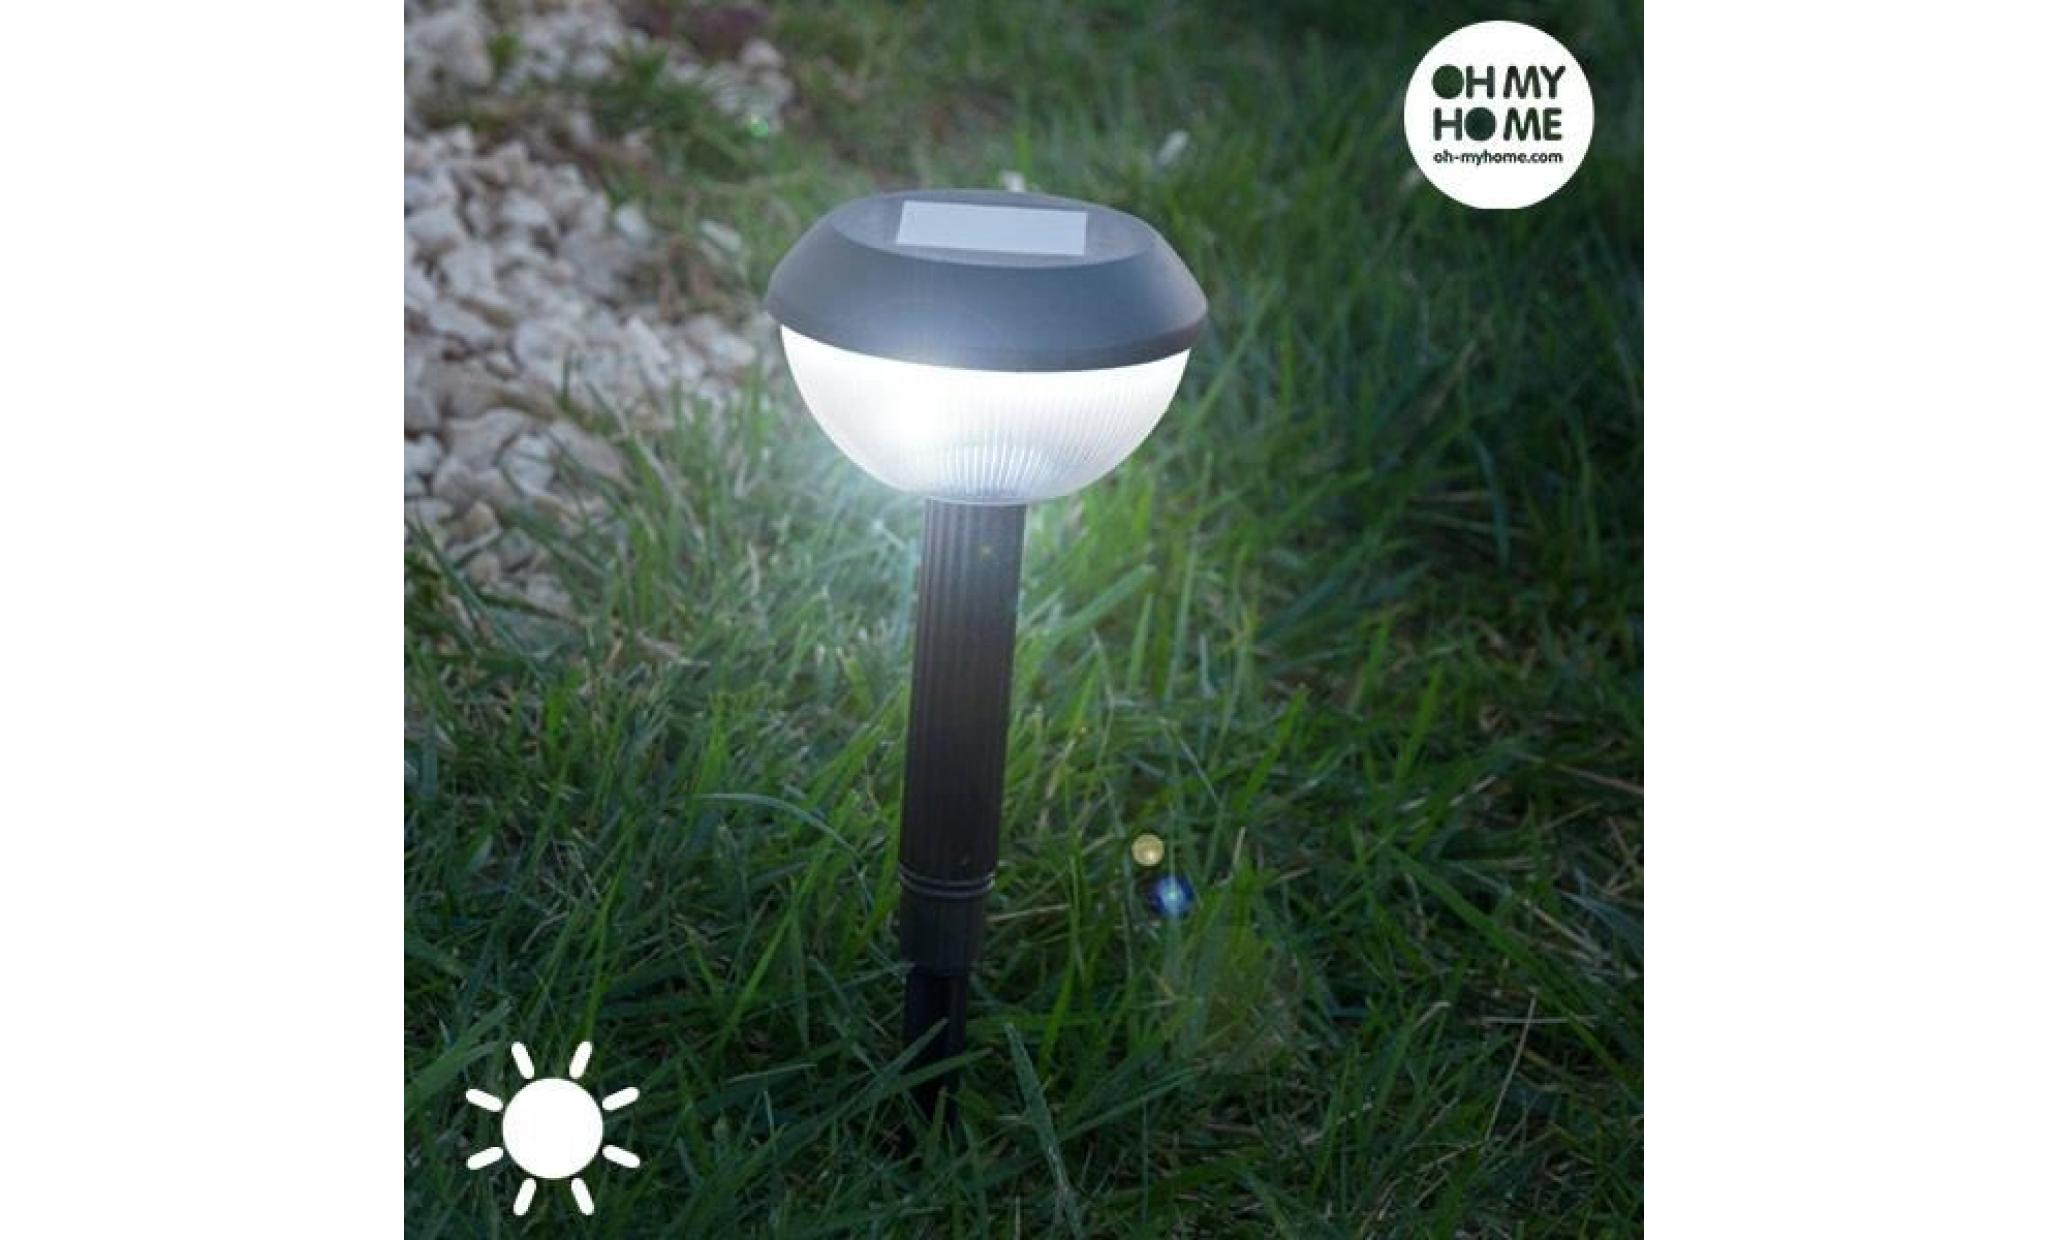 lampe solaire garden oh my home